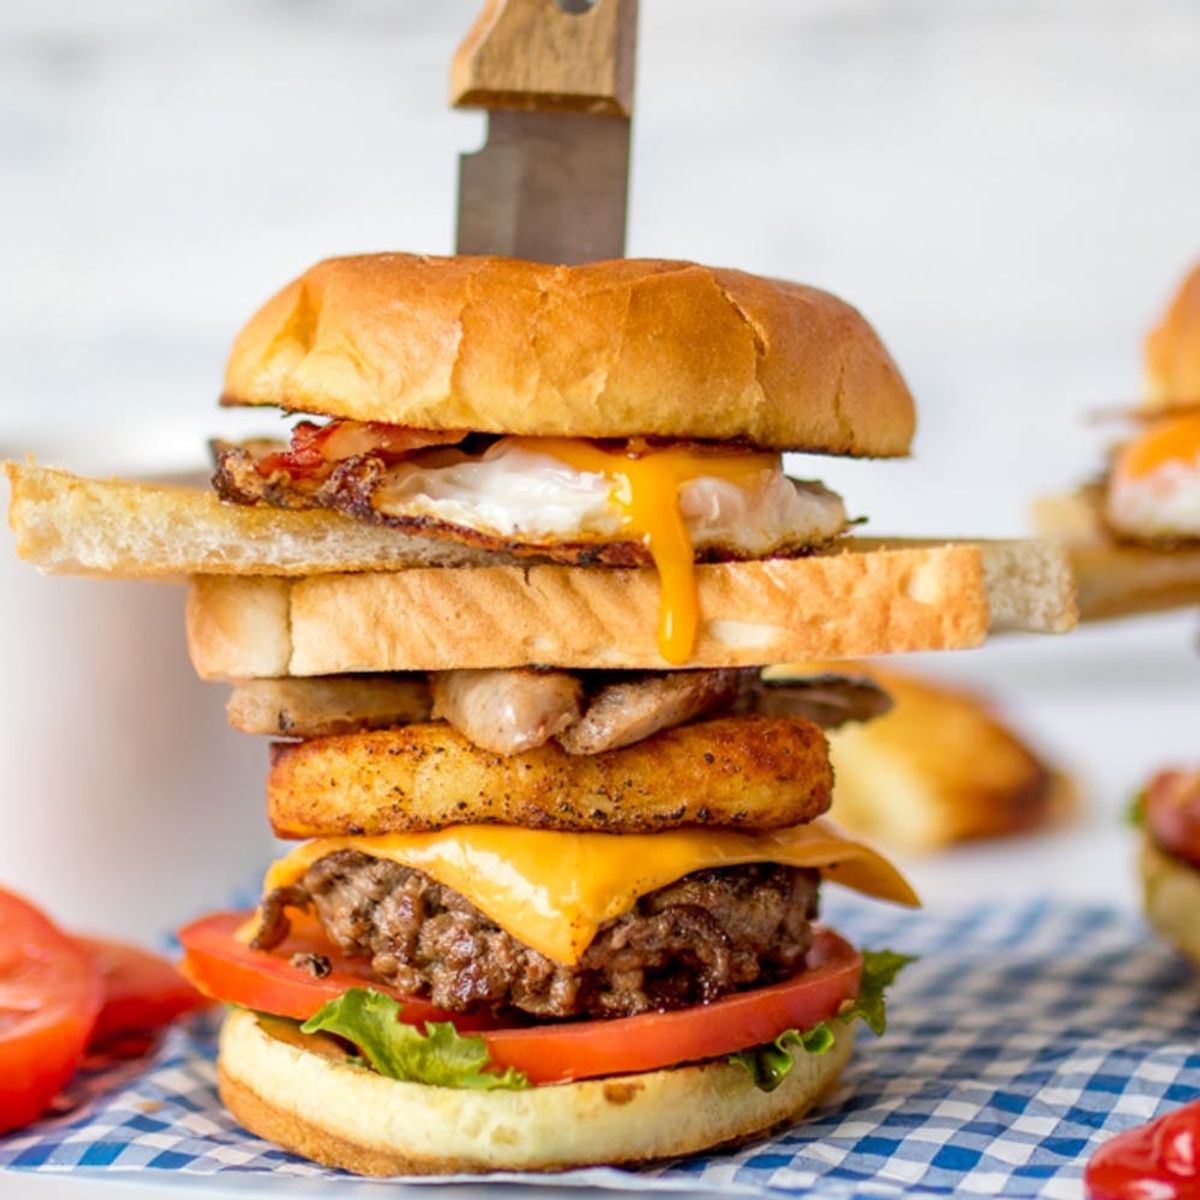 Make This Crazy Breakfast Burger for National Cheeseburger Day